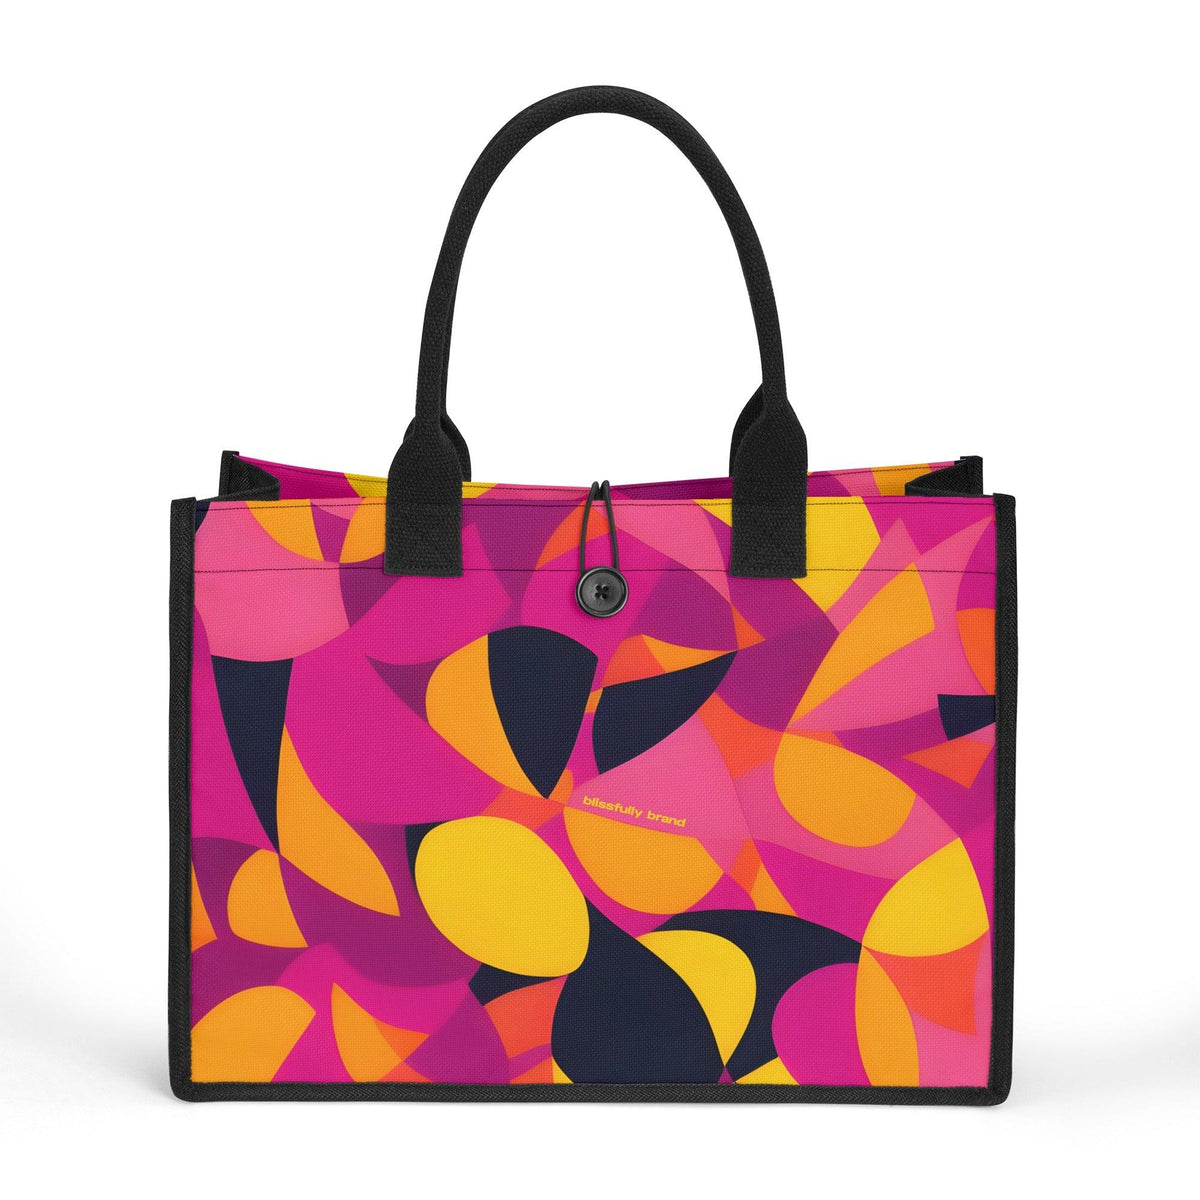 Airline Series Button Tie Canvas Tote Bag - Abstract Multicolor Print Medium Large Durable Handbag Mod Retro Bold Pink Orange Yellow Funky Blissfully Brand Flight 929 Munich Psychedelic 70's pop art Geometric